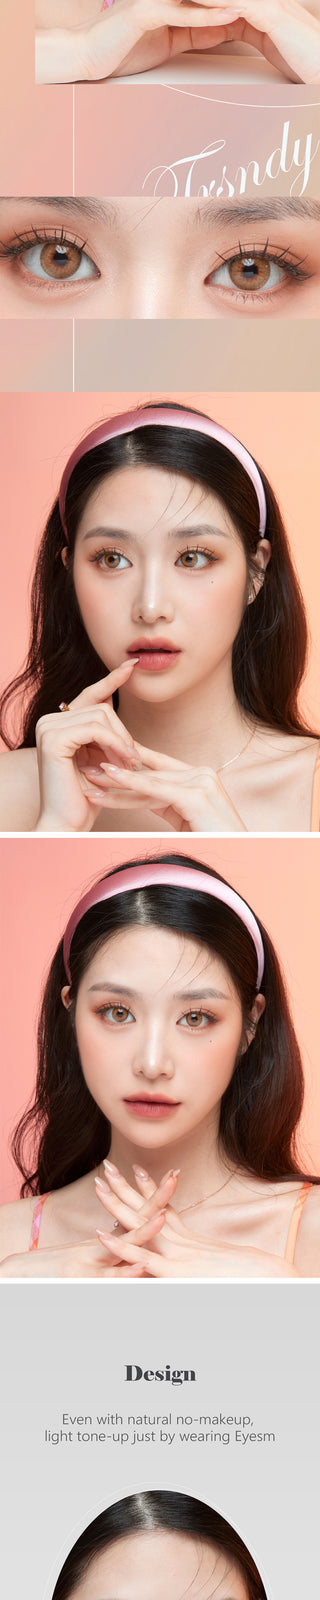 Several views of a Korean model with the Toffee Brown color contact lenses. An enlargement of a model's eyes with the prescription colored contacts, demonstrating the subtle yet striking change on dark eyes.